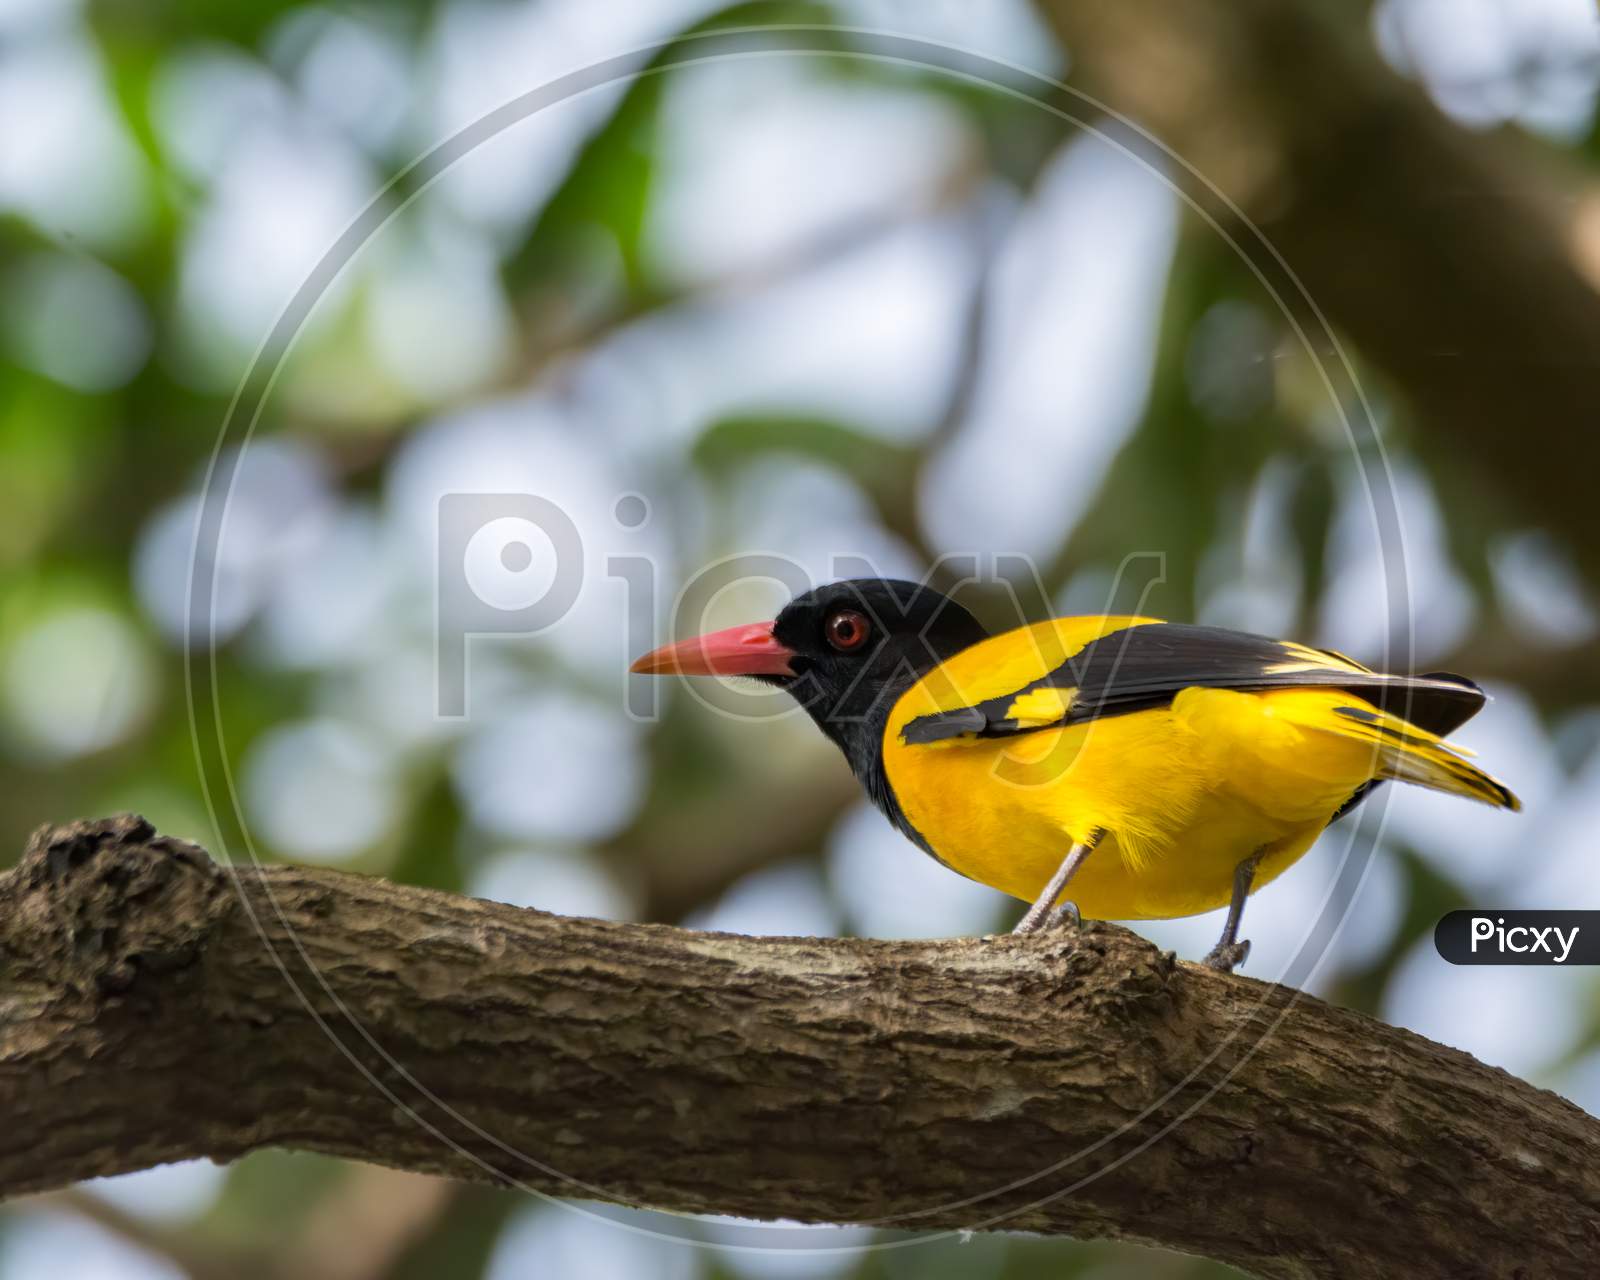 Black-Hooded Oriole Perched On A Branch